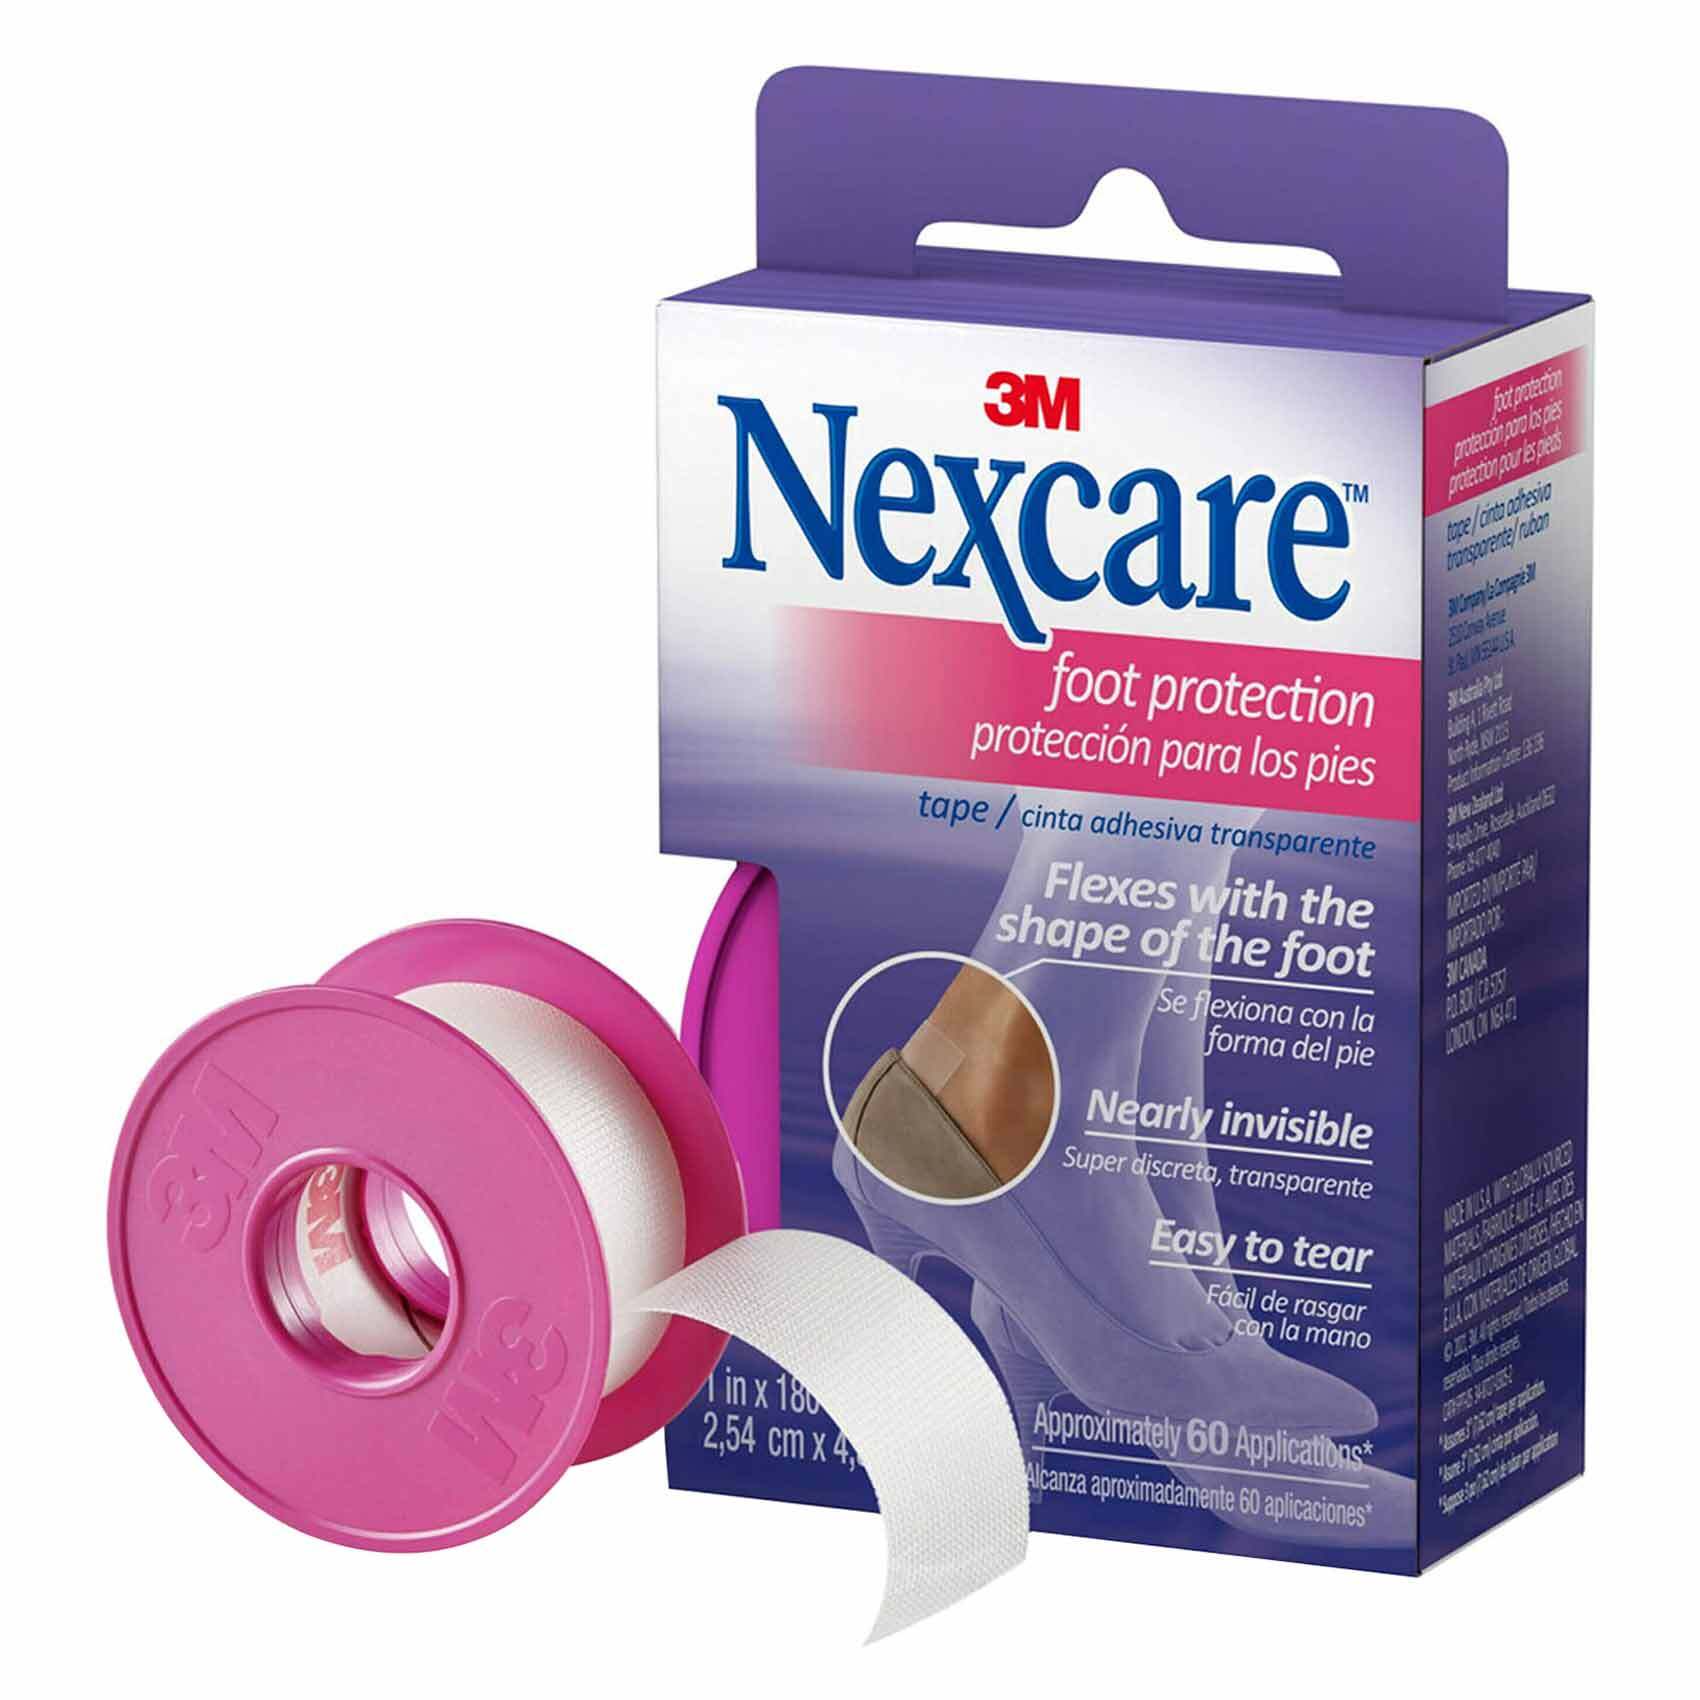 Buy 3M Nexcare Foot Protection Tape 25mmx4.5m Online